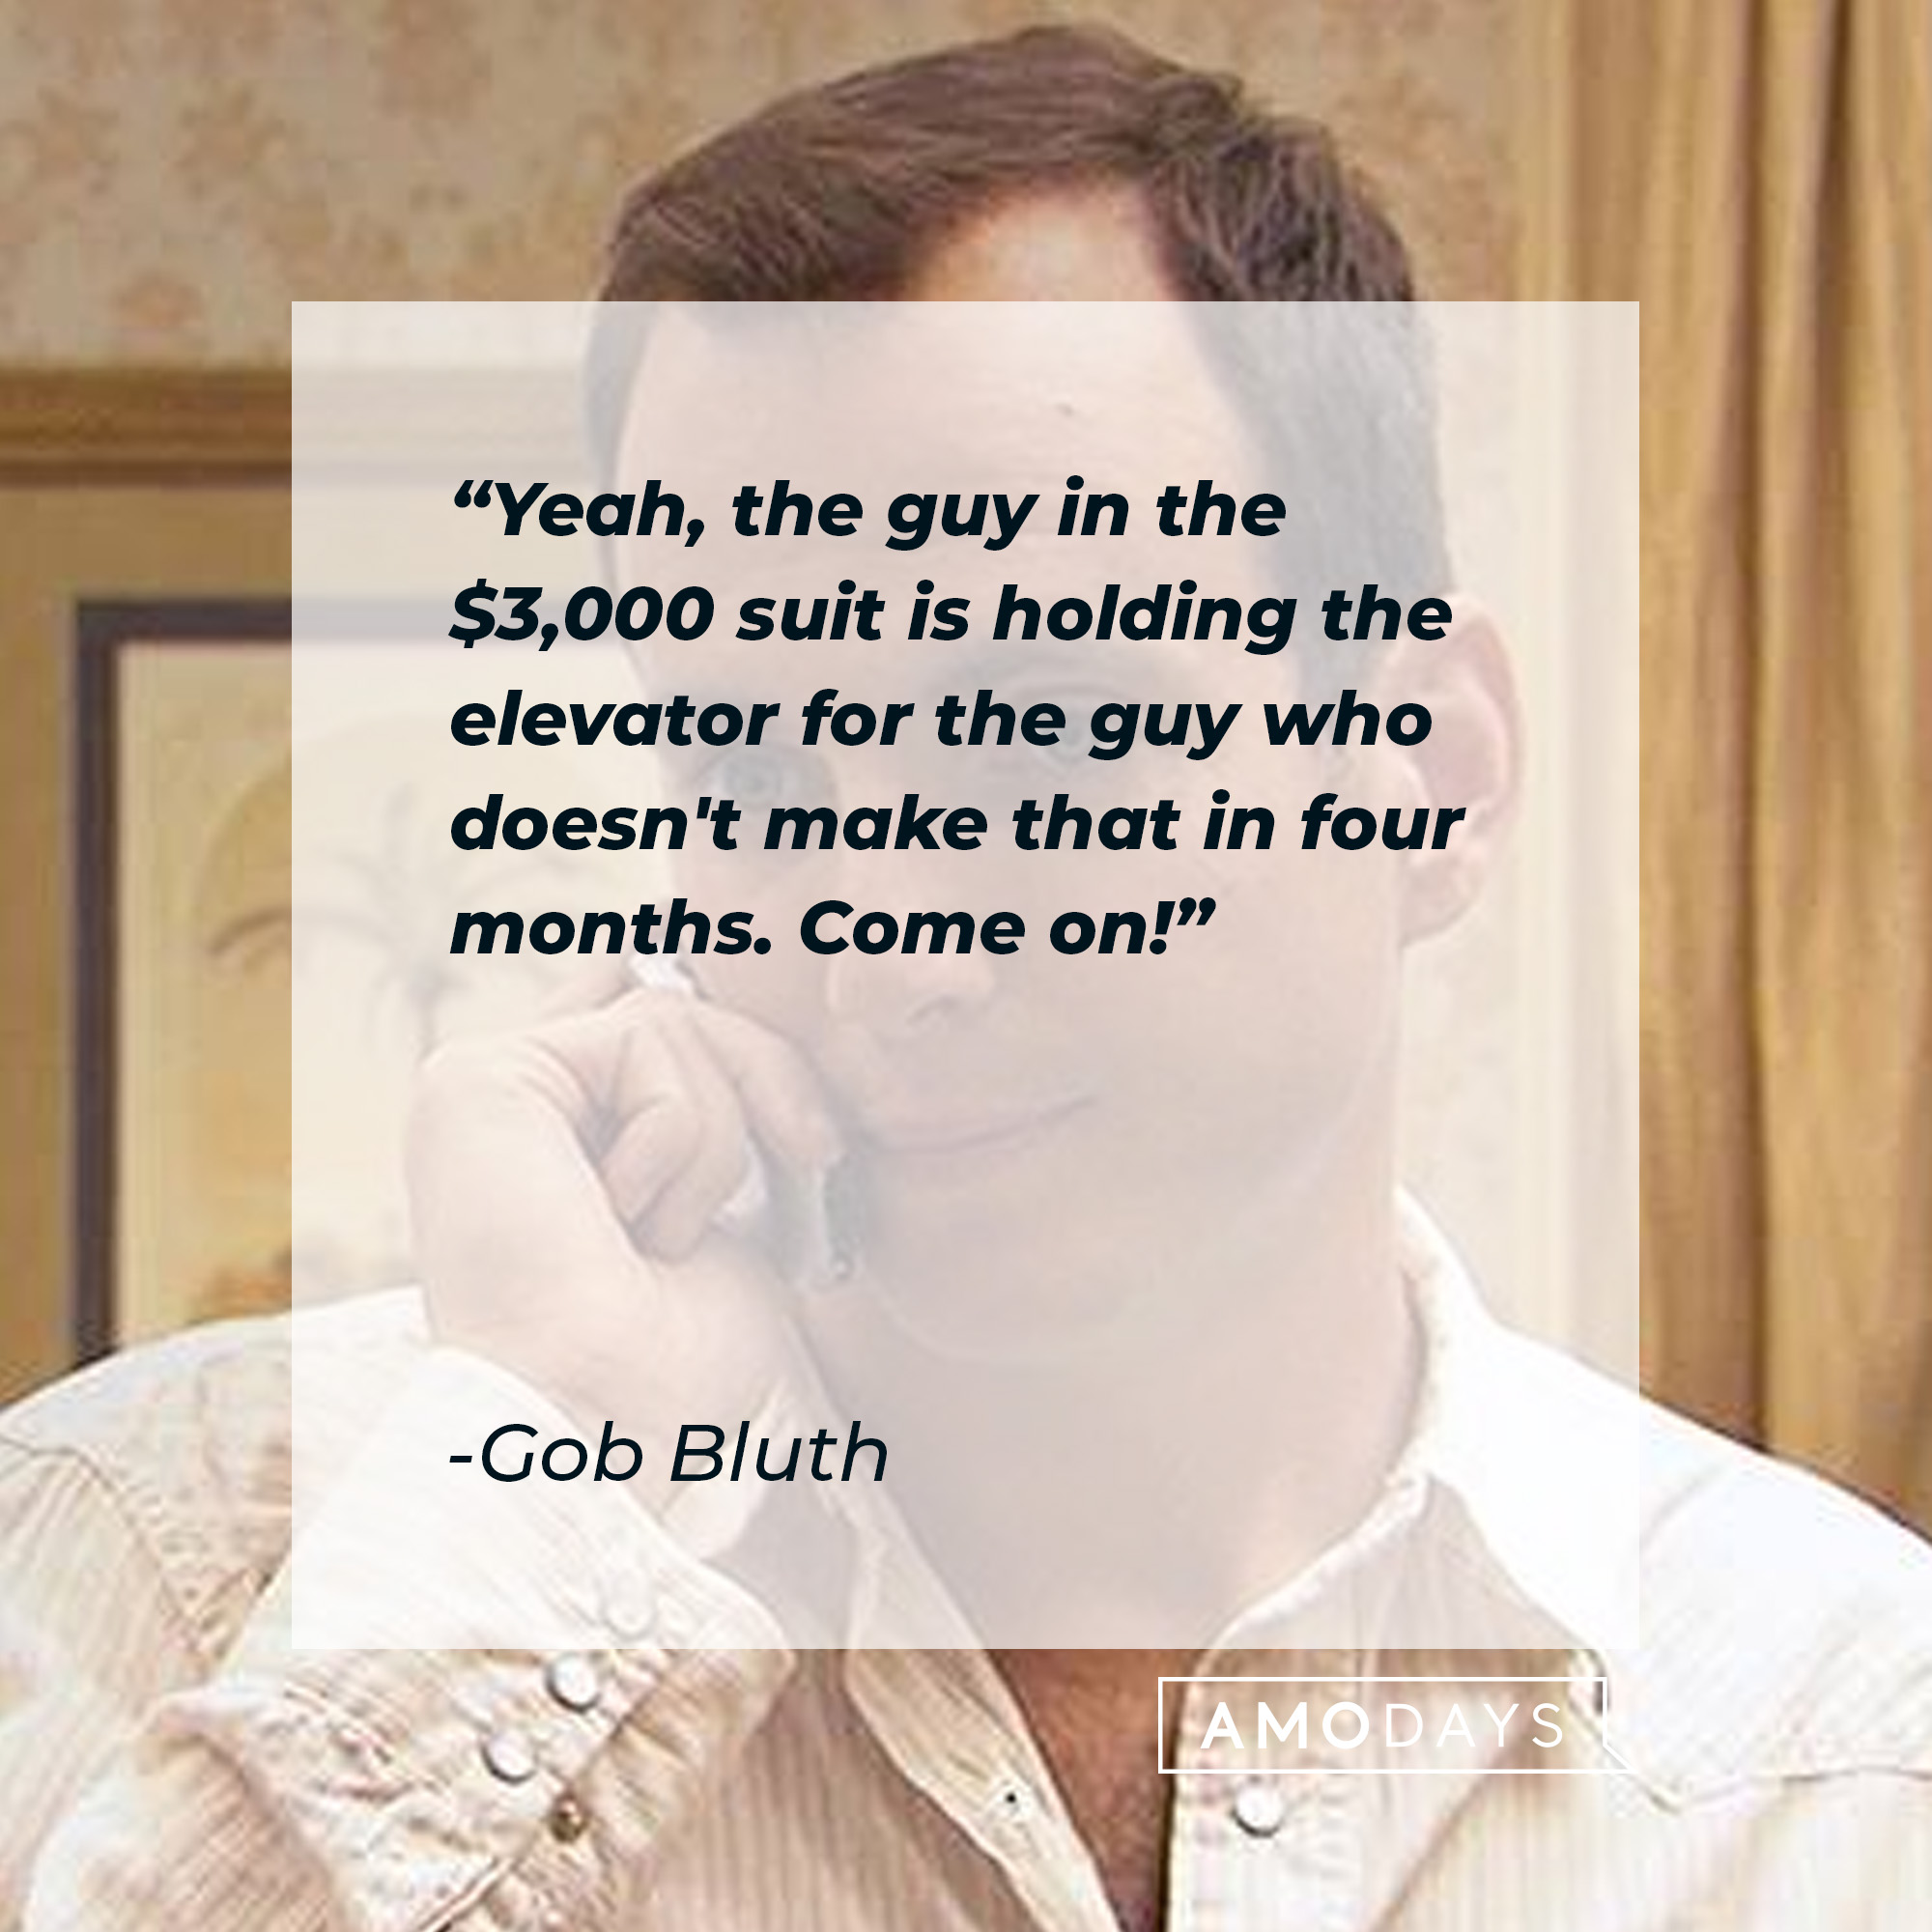 Gob Bluth's quote: "Yeah, the guy in the $3,000 suit is holding the elevator for the guy who doesn't make that in four months. Come on!" | Source: facebook.com/ArrestedDevelopment